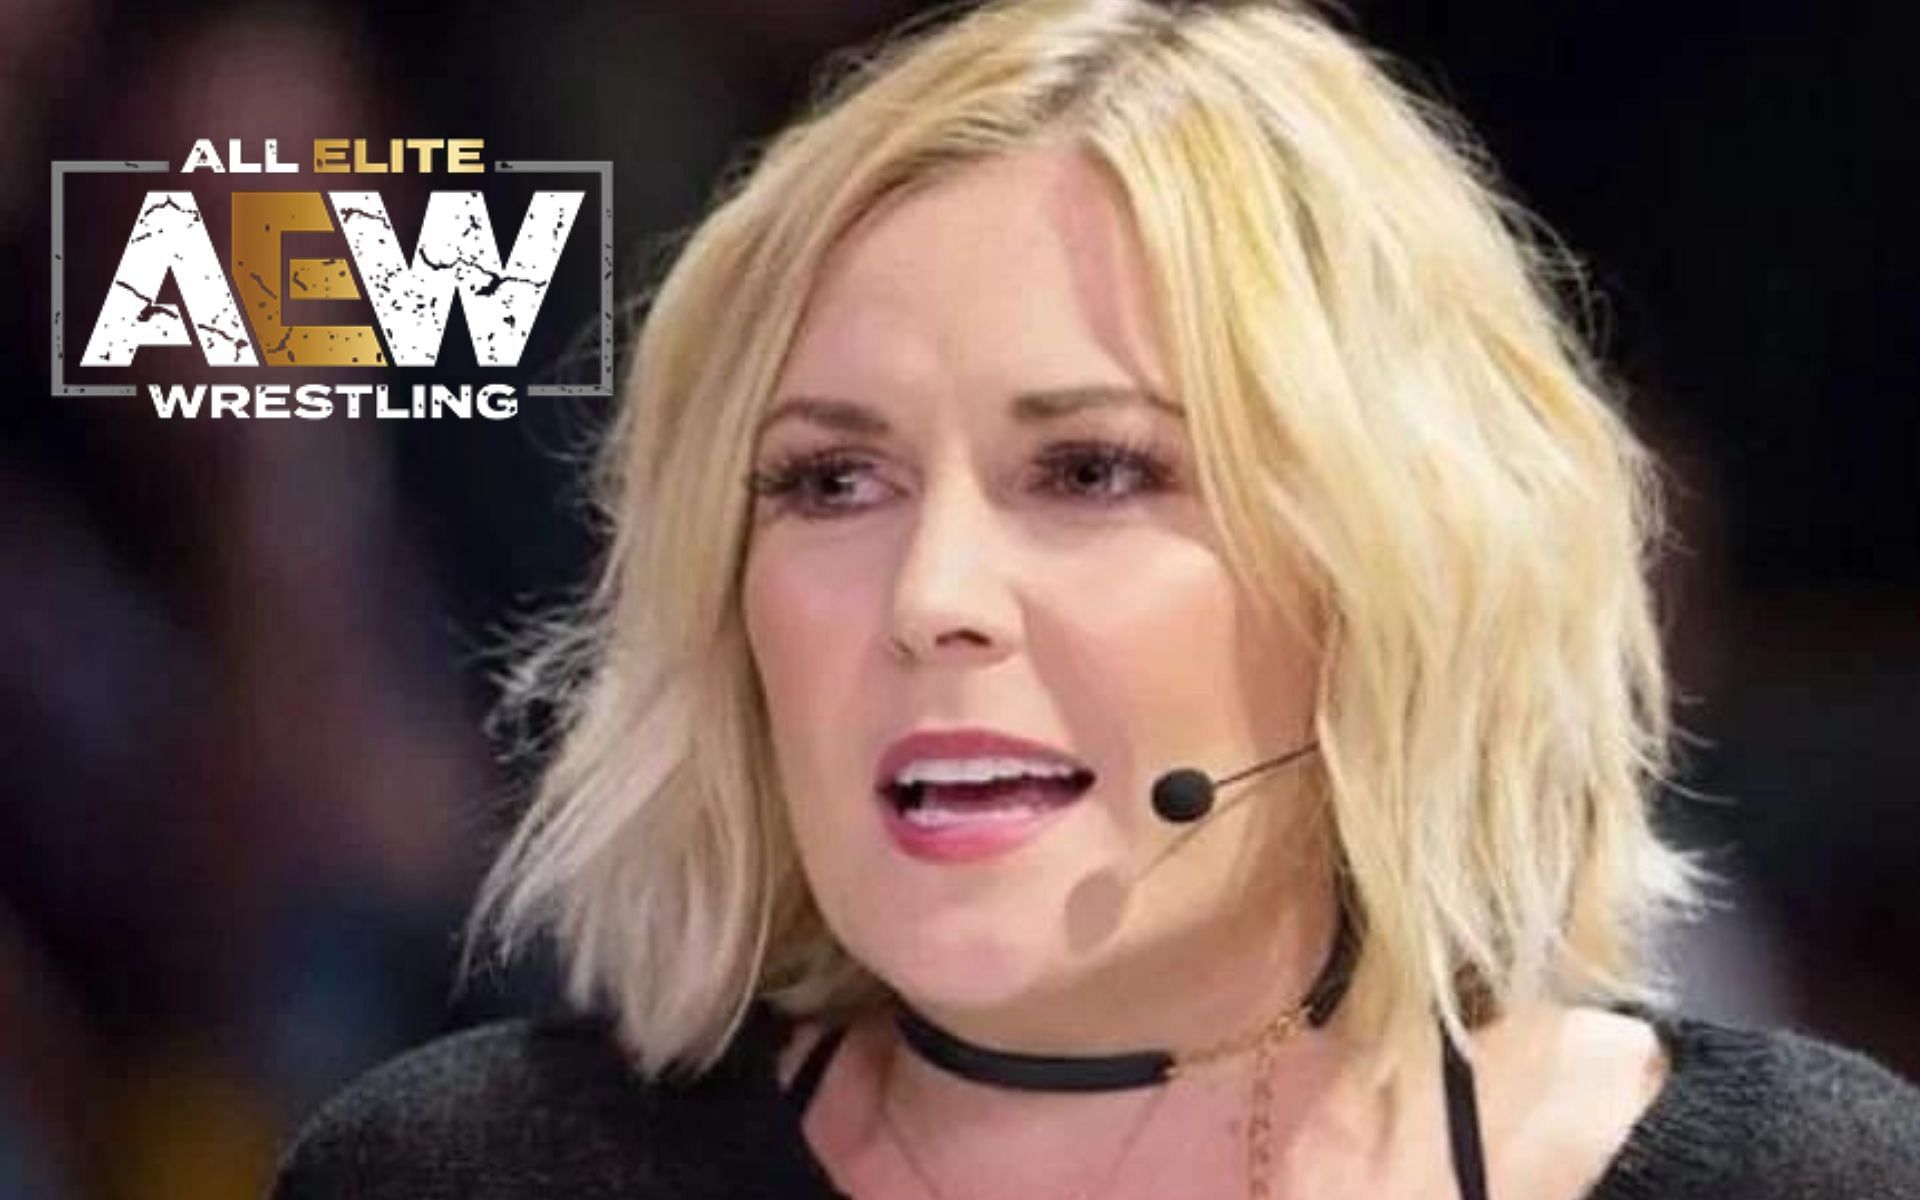 Renee Paquette debuted on AEW in October last year